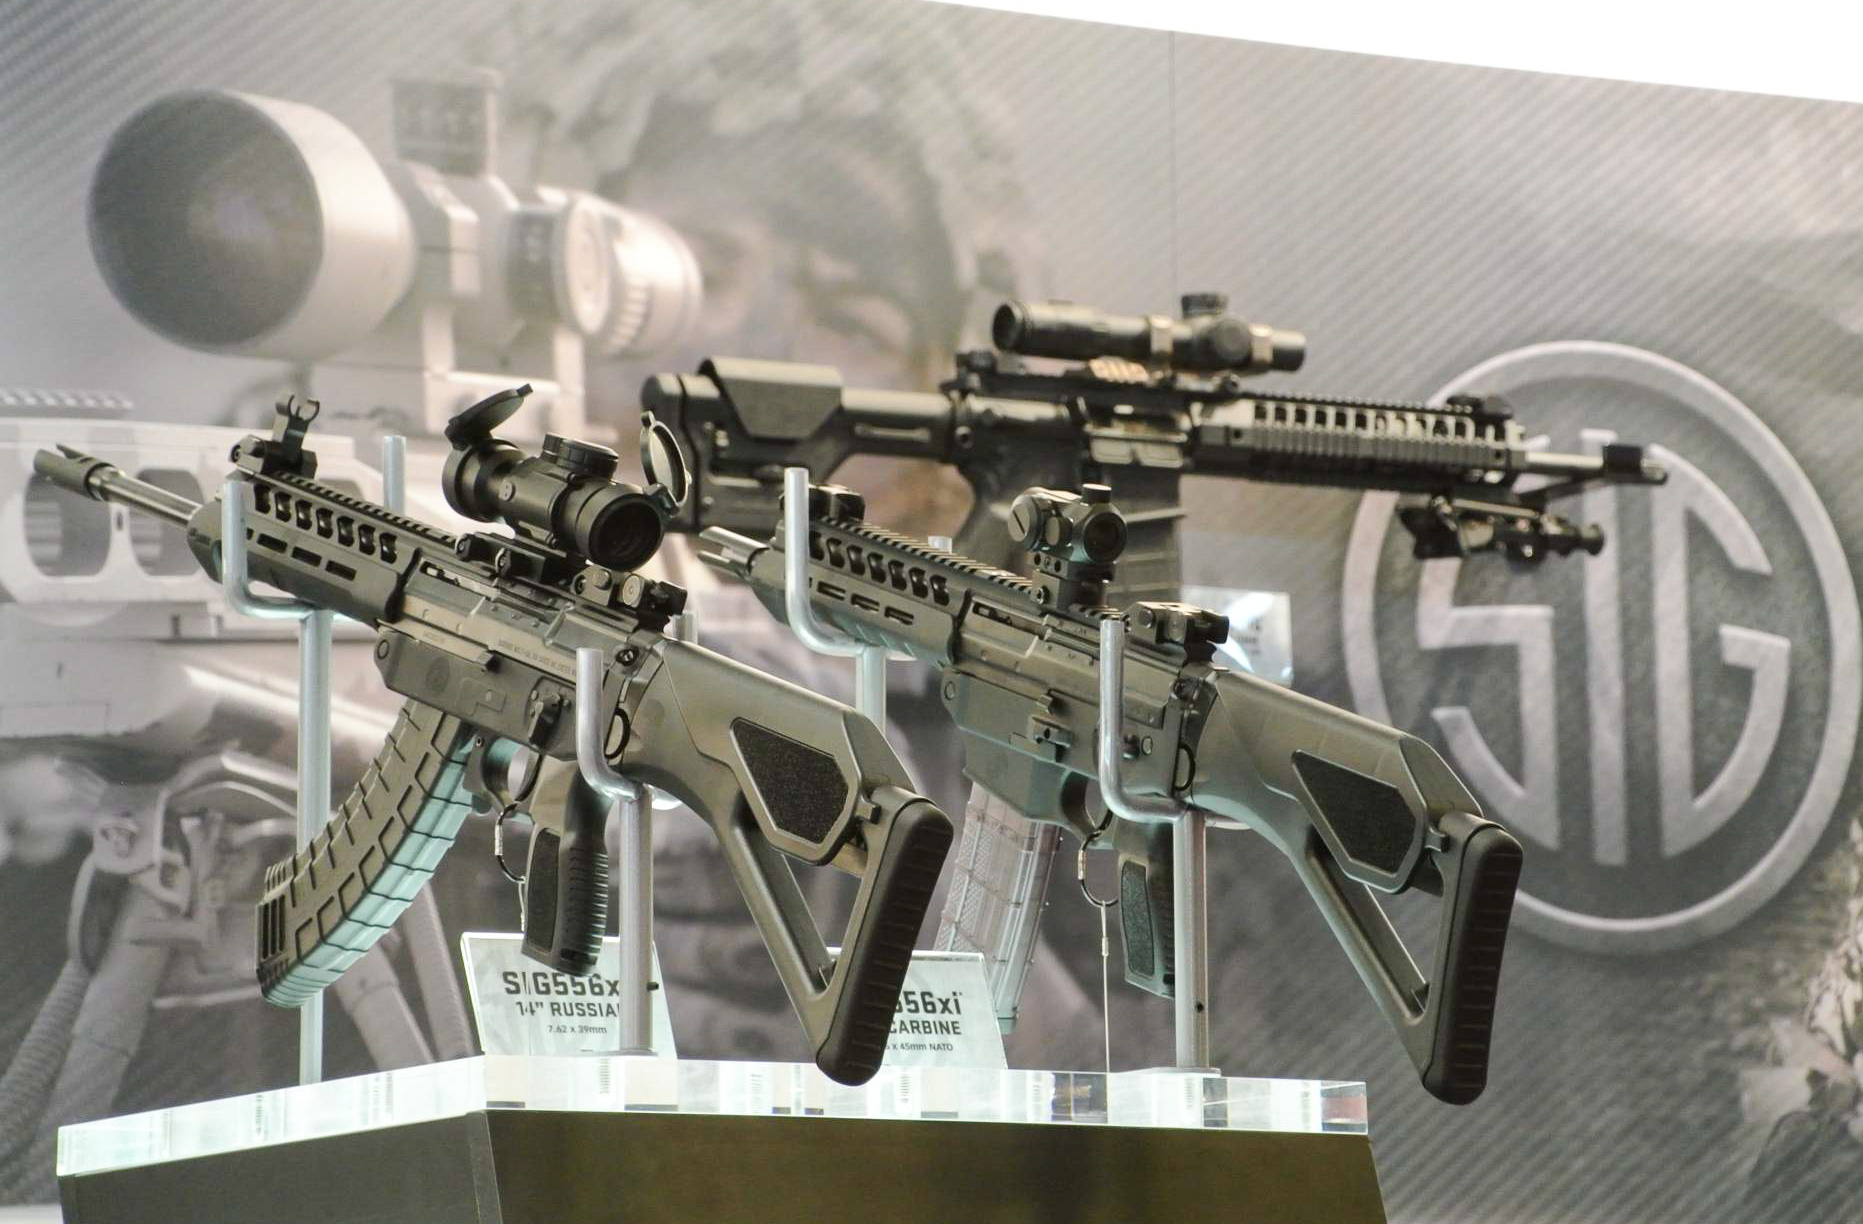 SIG Sauer showcased the SIG556xi assault rifles at the 2014 edition of the ...